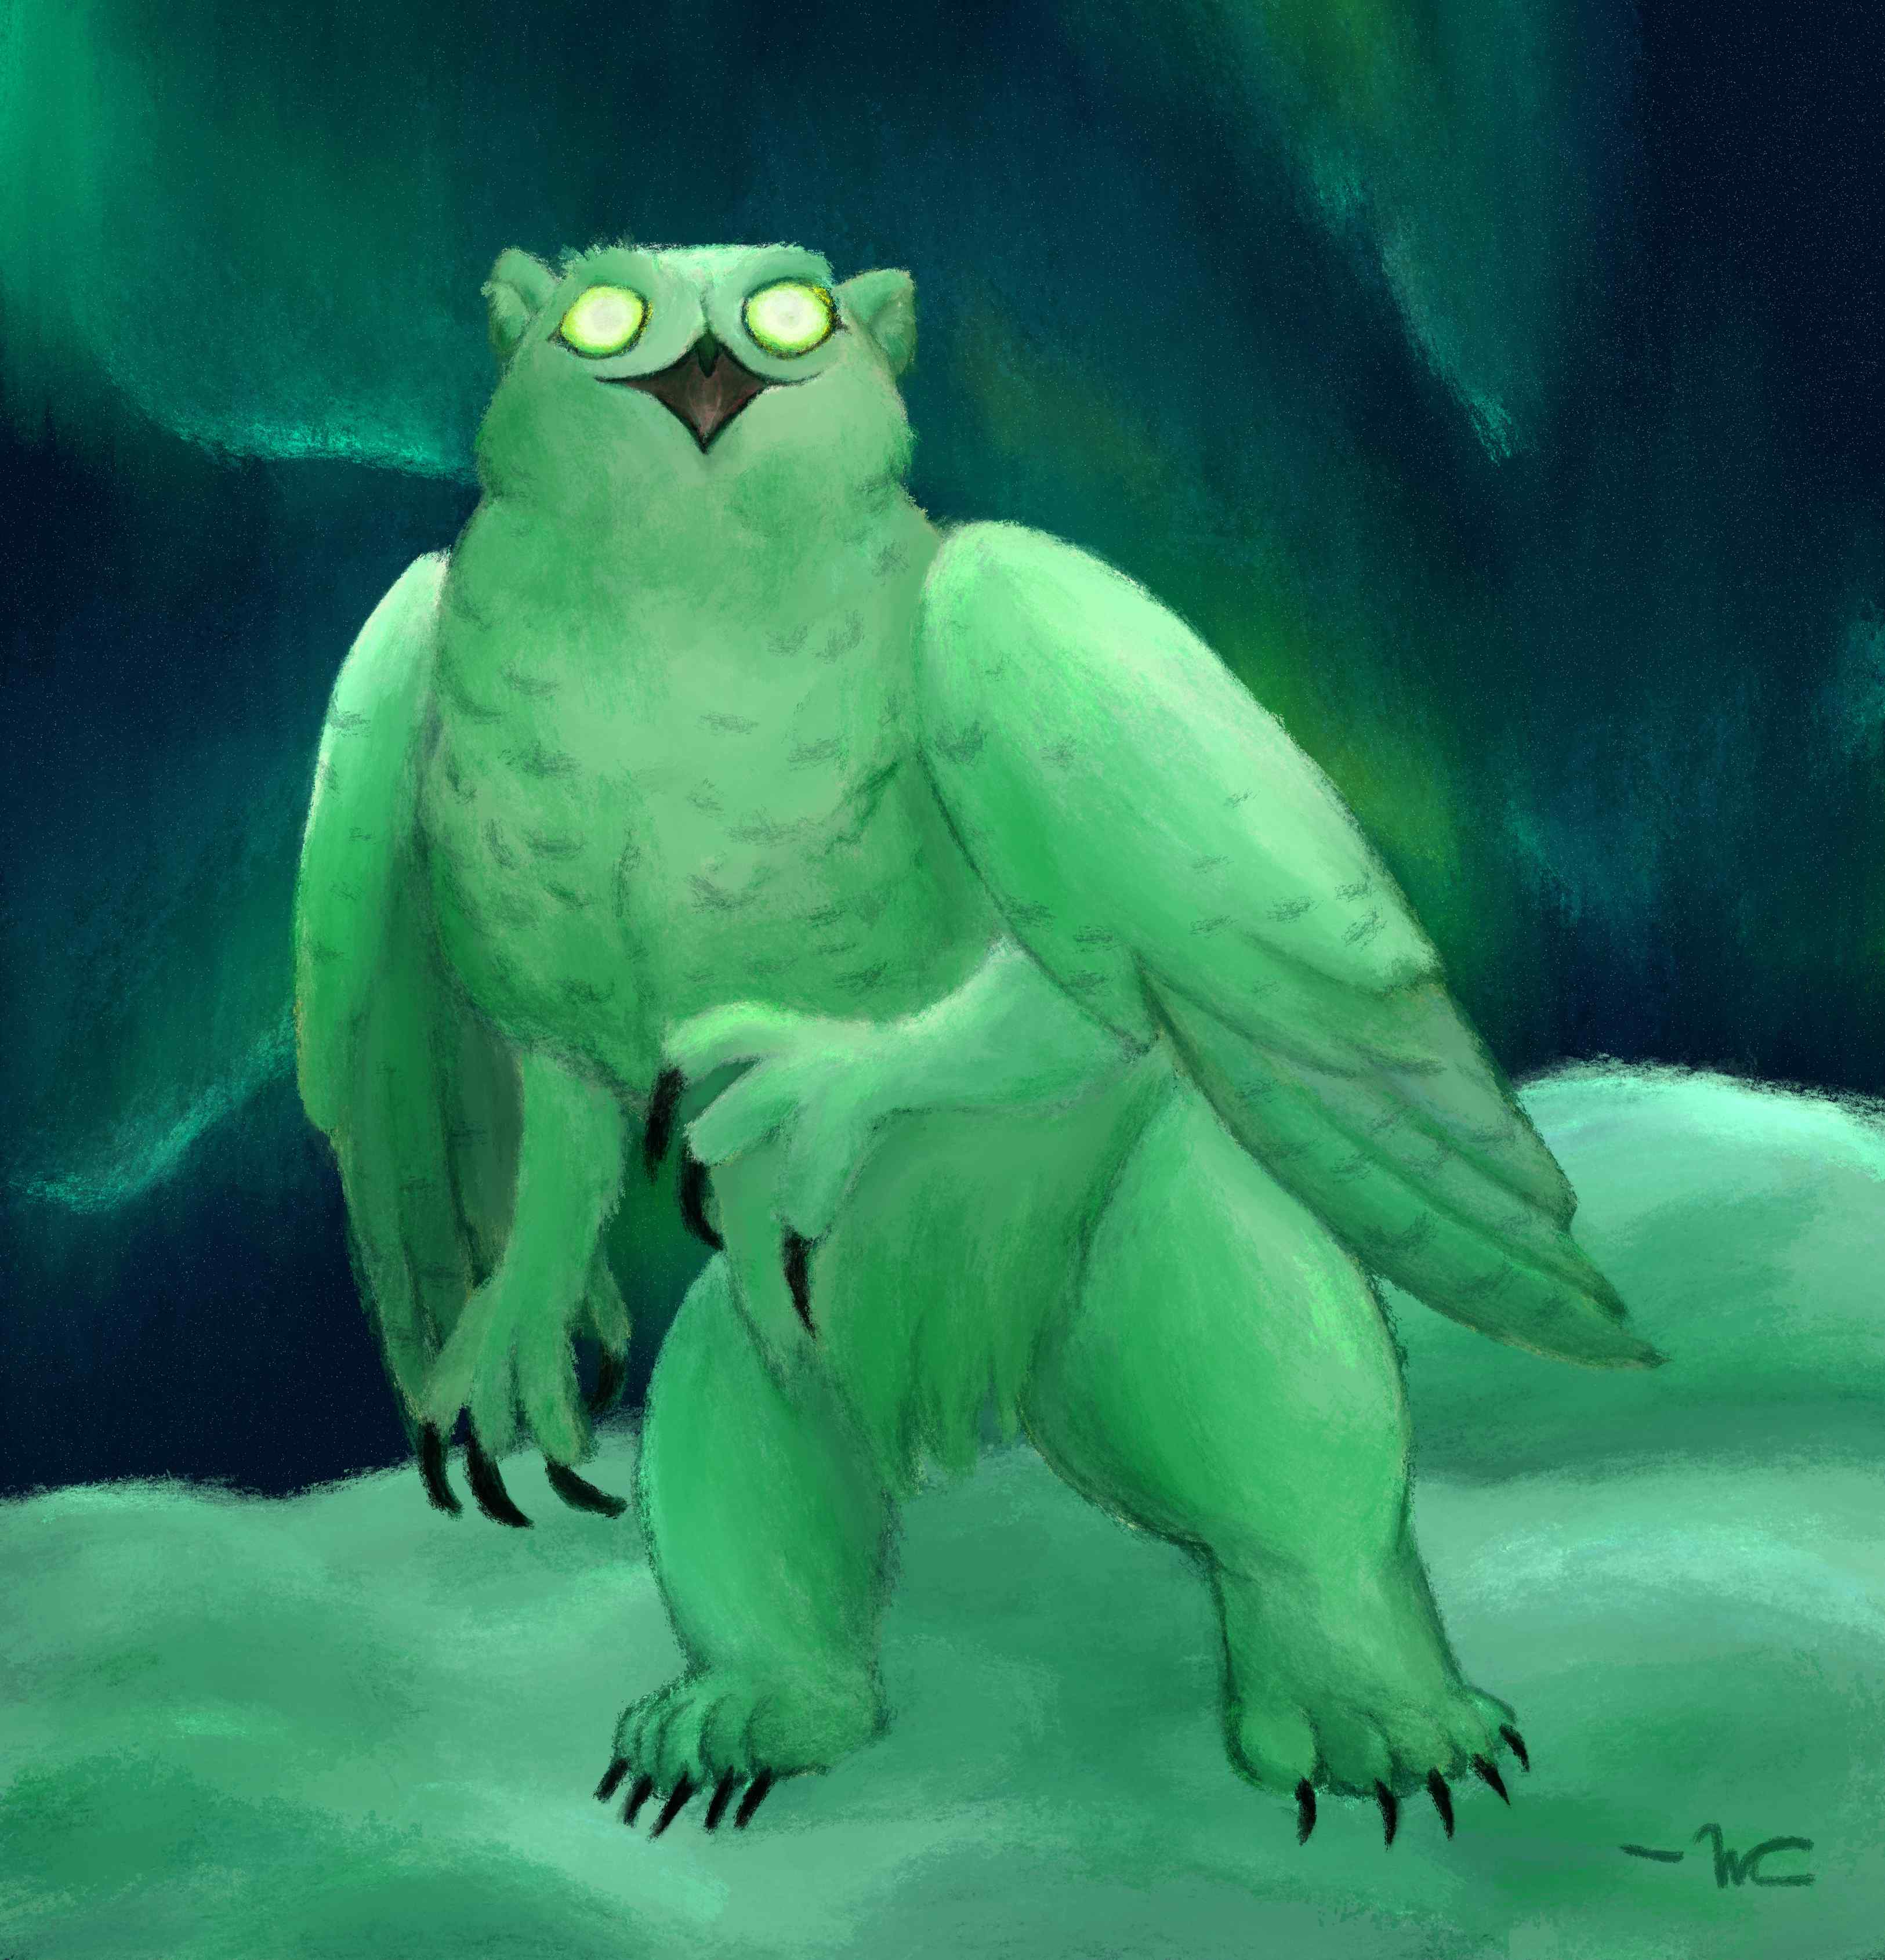 A gryphon that is part snowy owl and part polar bear. It's stood on its hind legs in the snow, with an open mouth and glowing eyes. The northern lights are in the night sky.